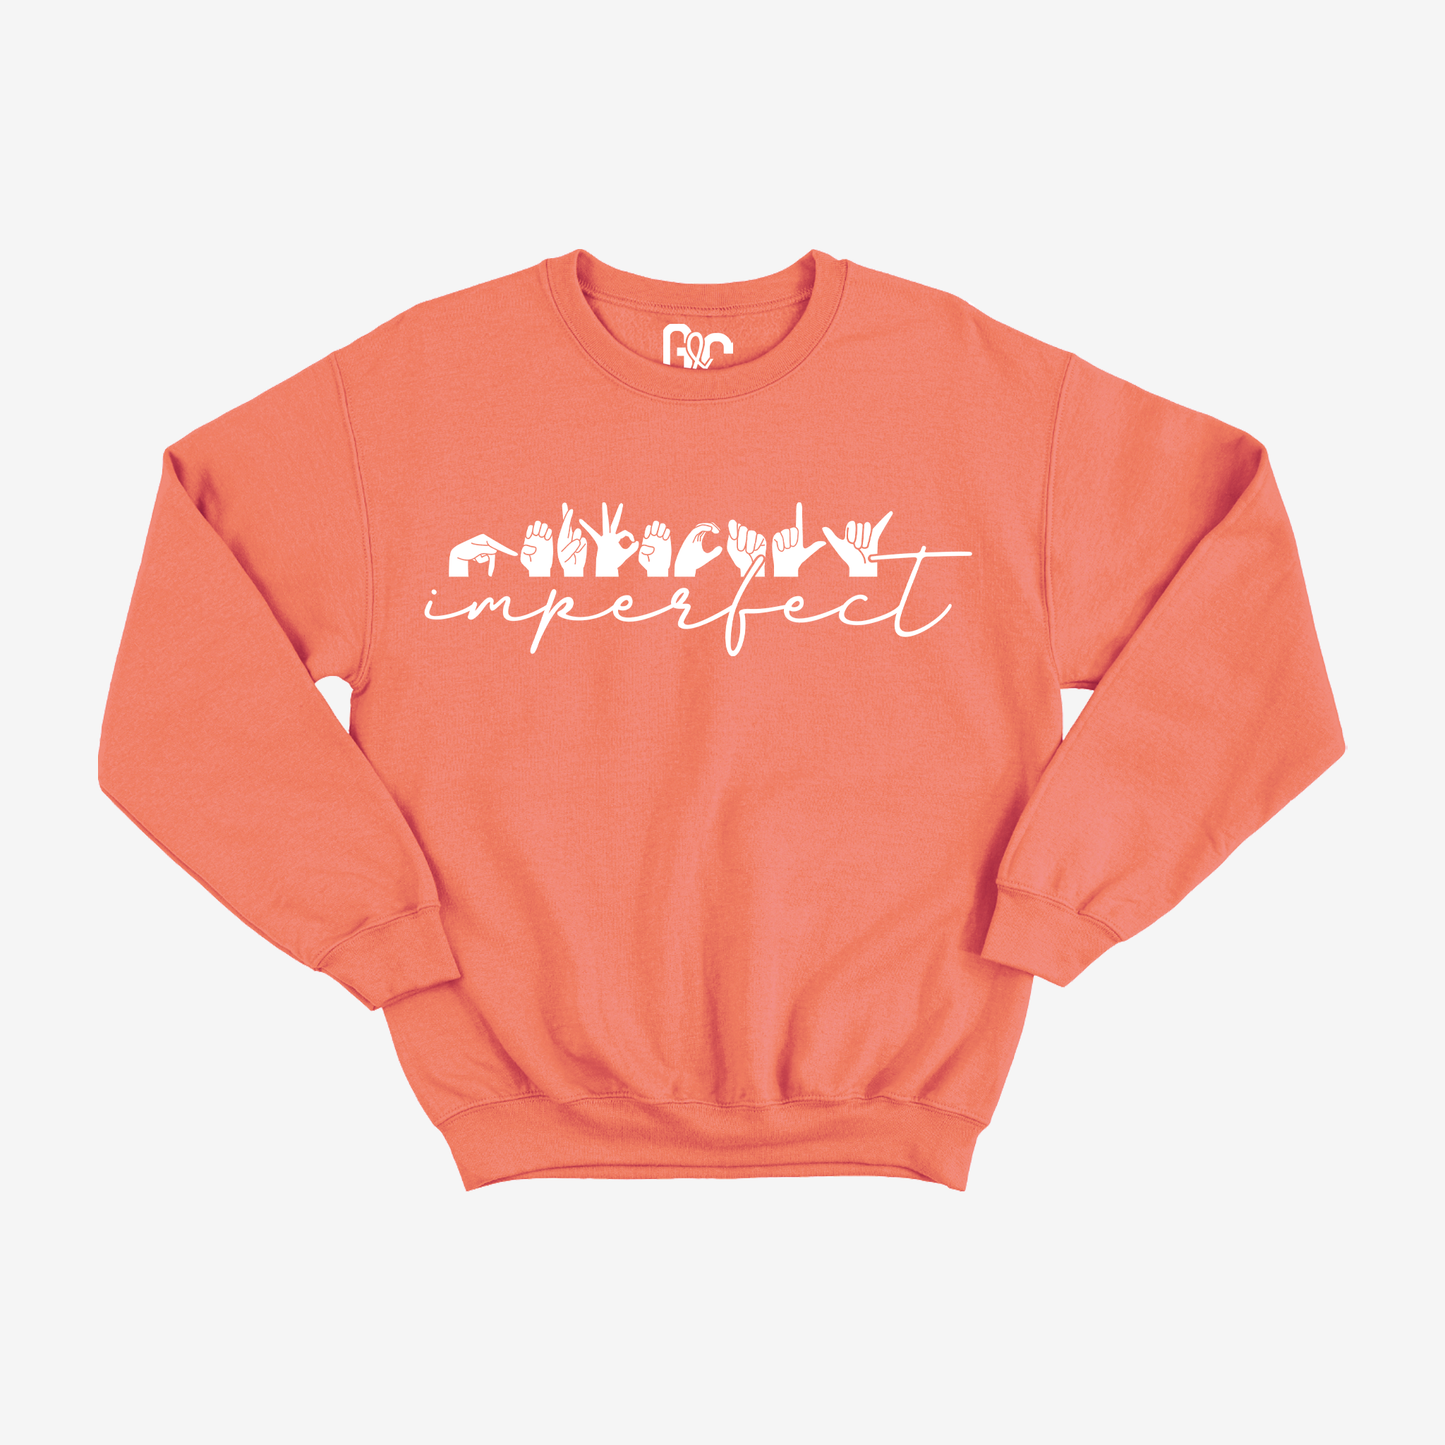 Perfectly Imperfect Crewneck